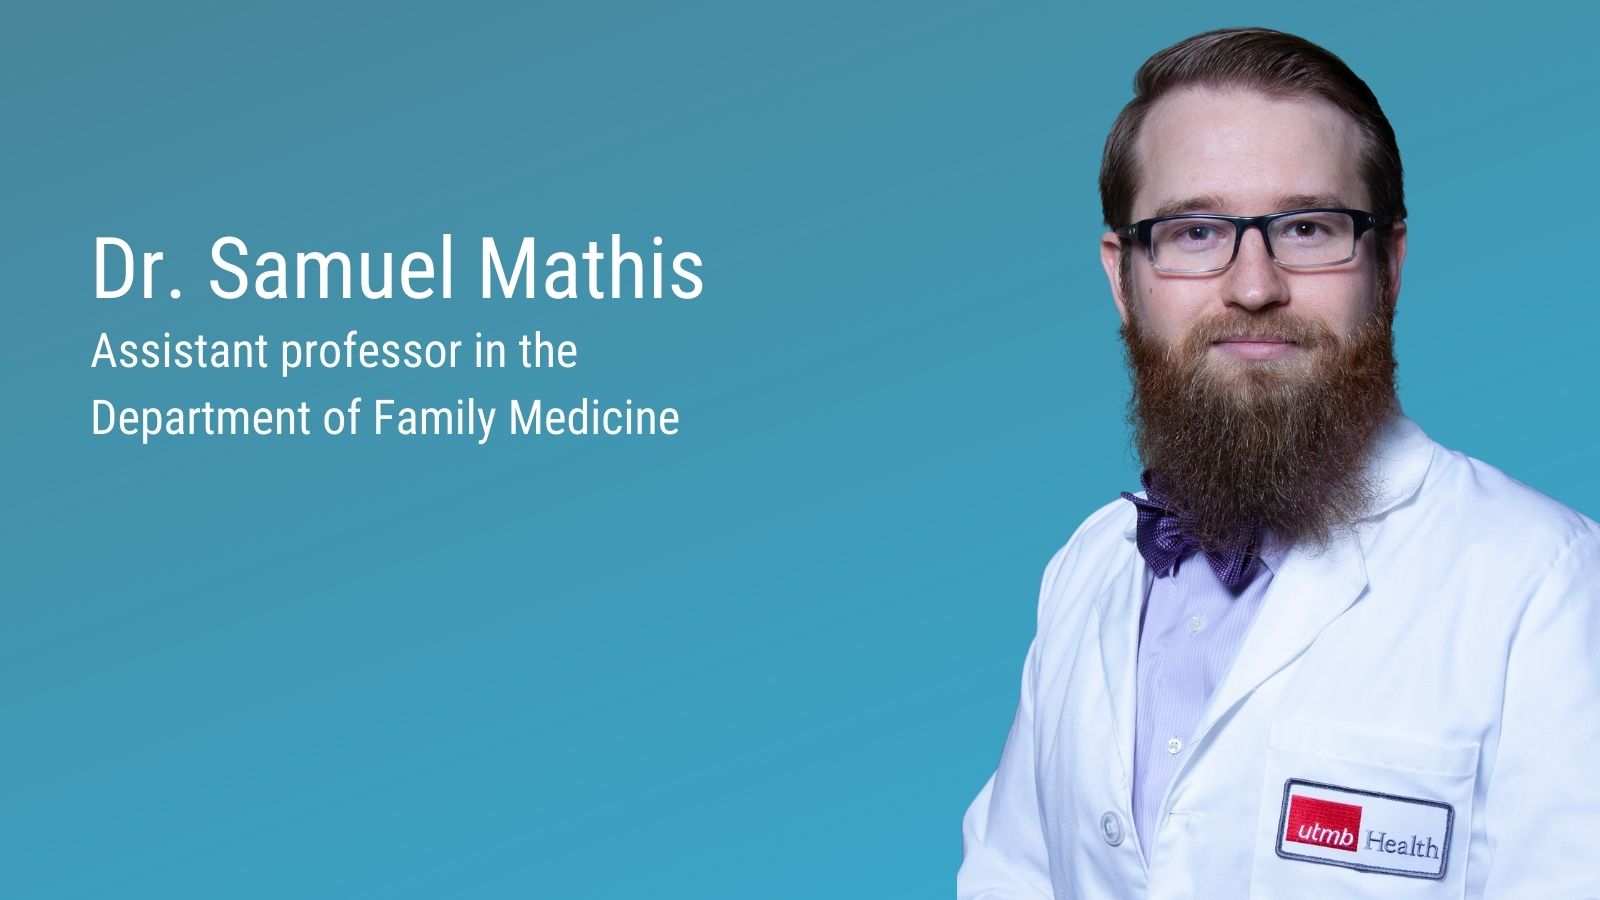 A picture of Dr. Samuel Mathis, assistant professor in the Department of Family Medicine